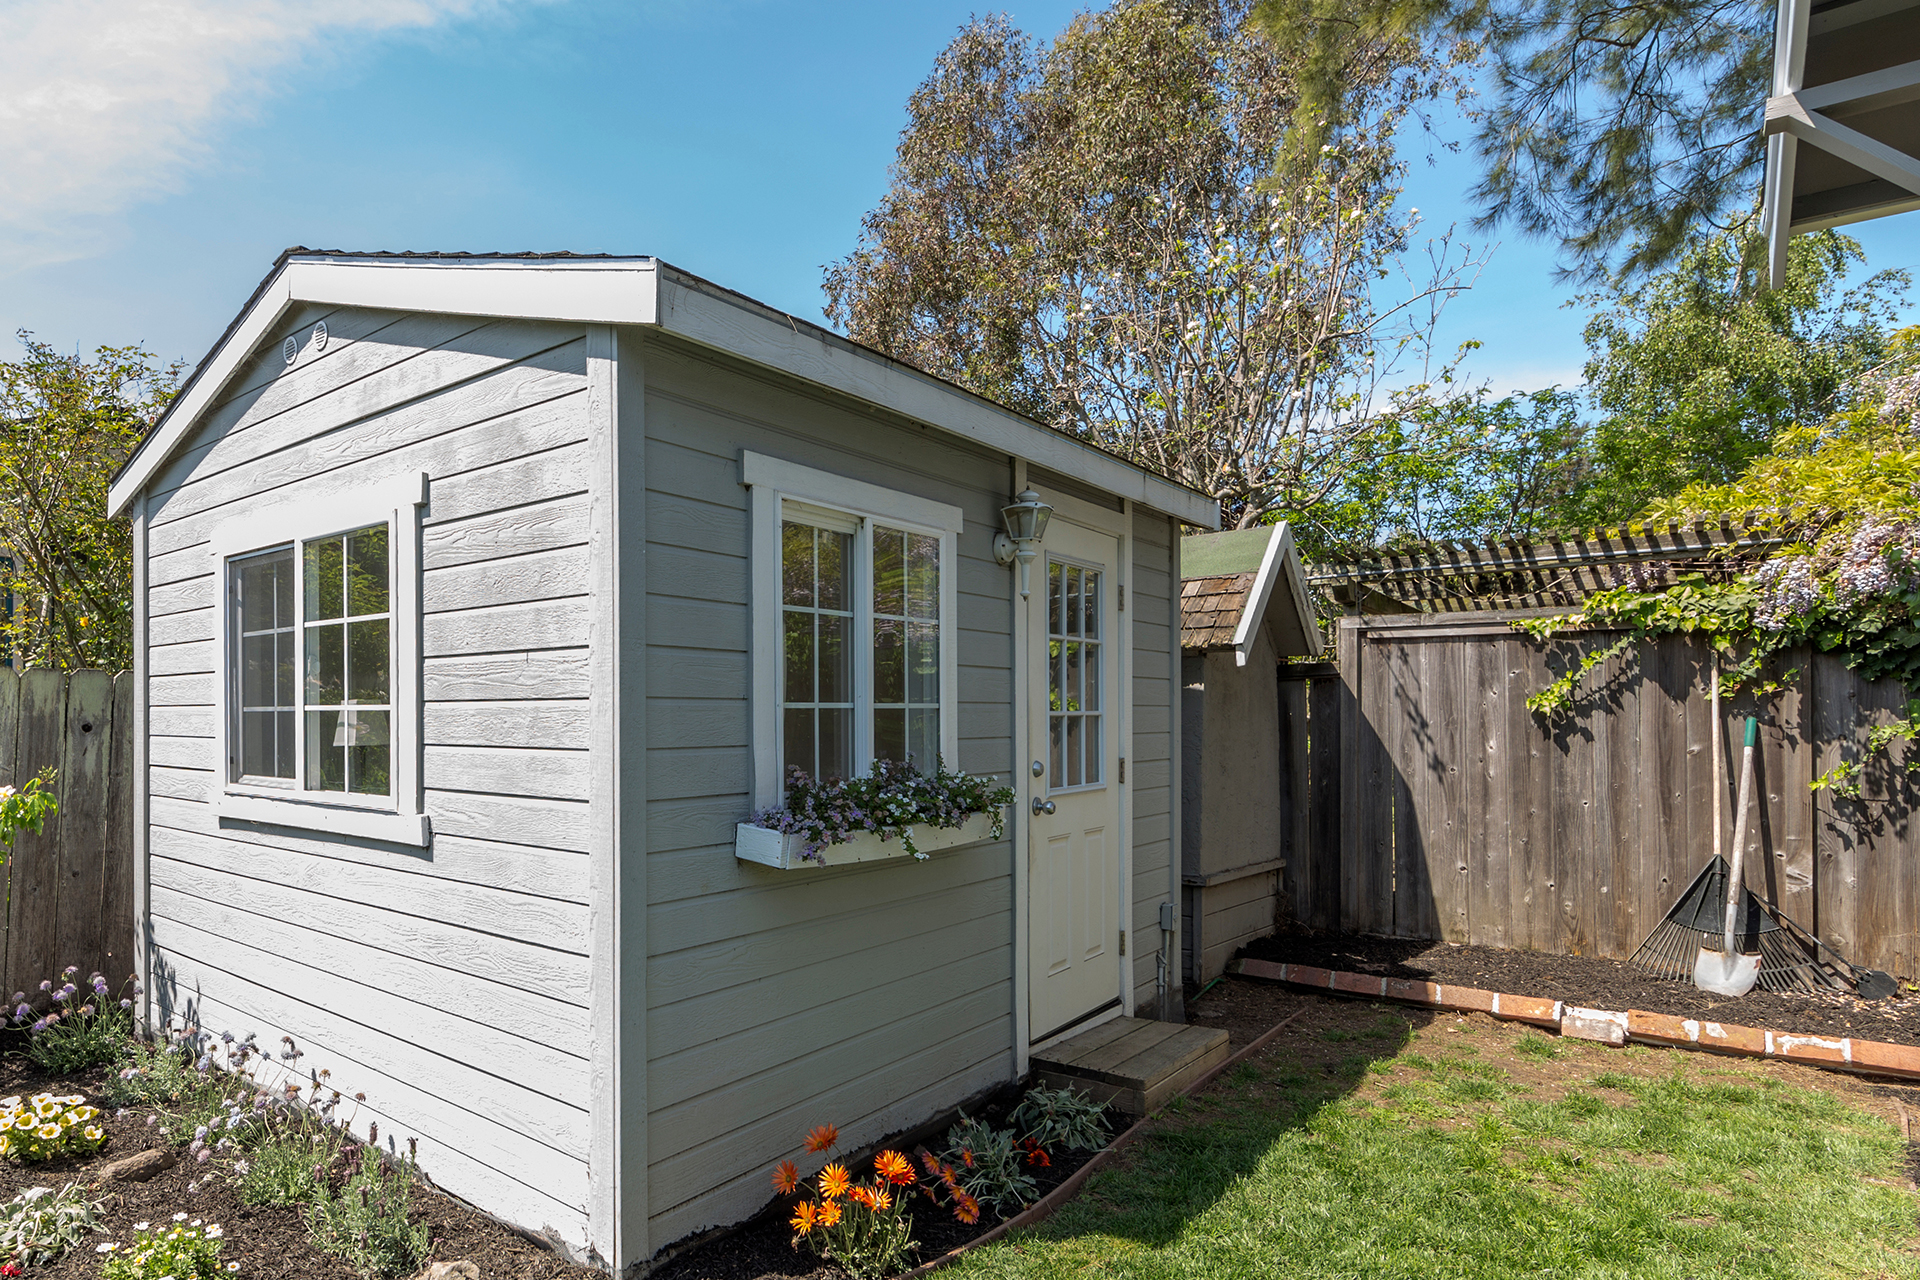 using clever garden shed placement to improve privacy